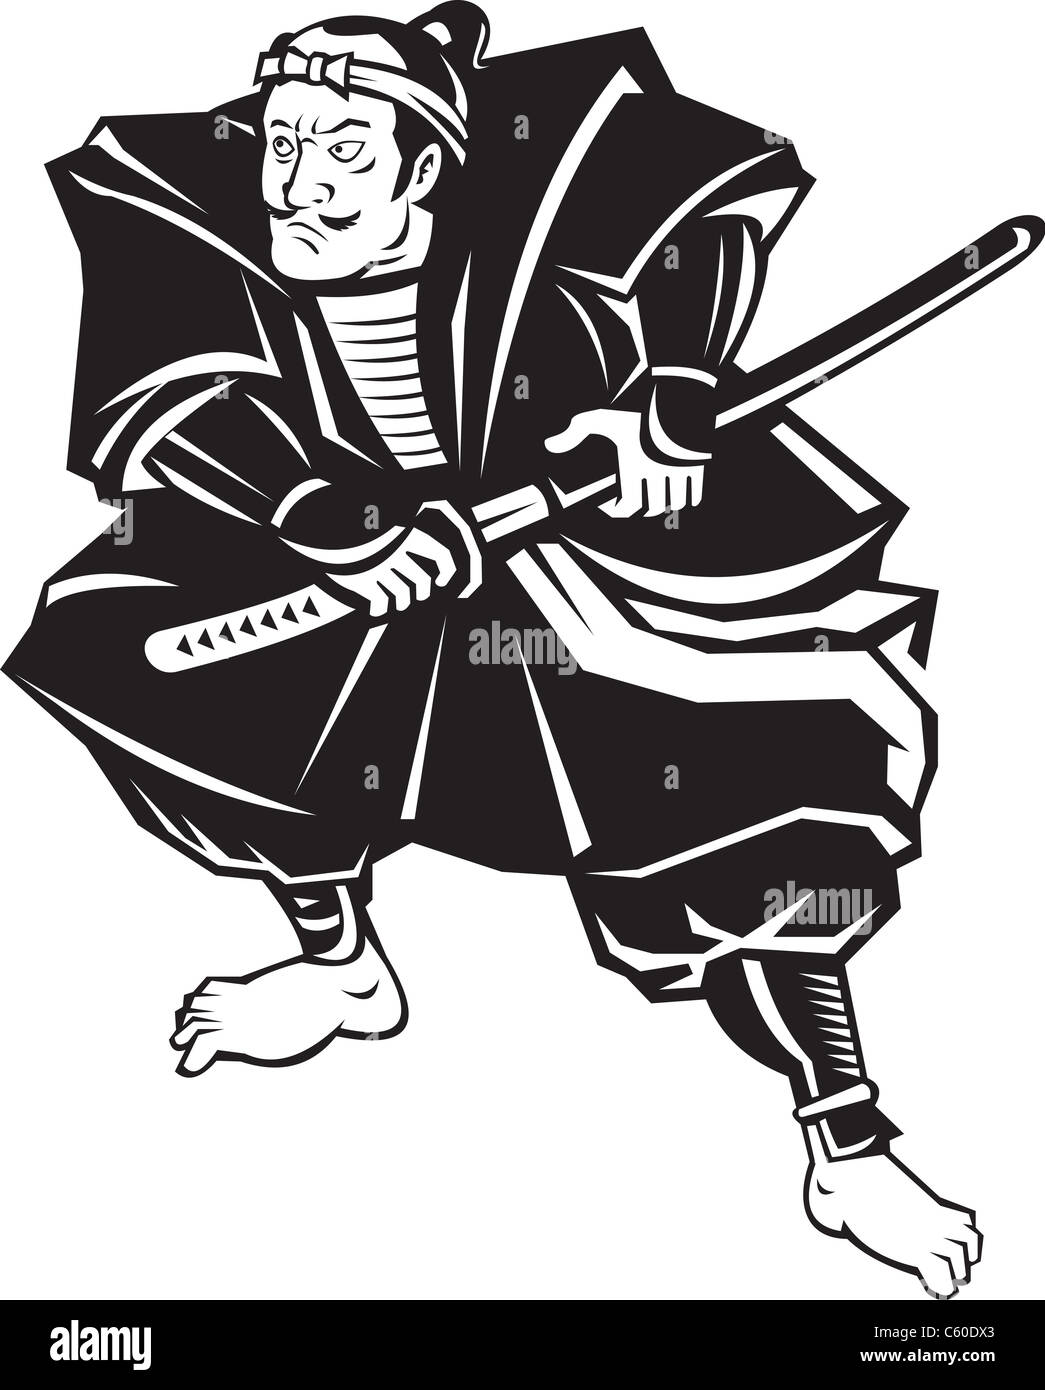 illustration of a Samurai warrior about to draw katana sword in fighting stance on isolated white background done in retro style Stock Photo